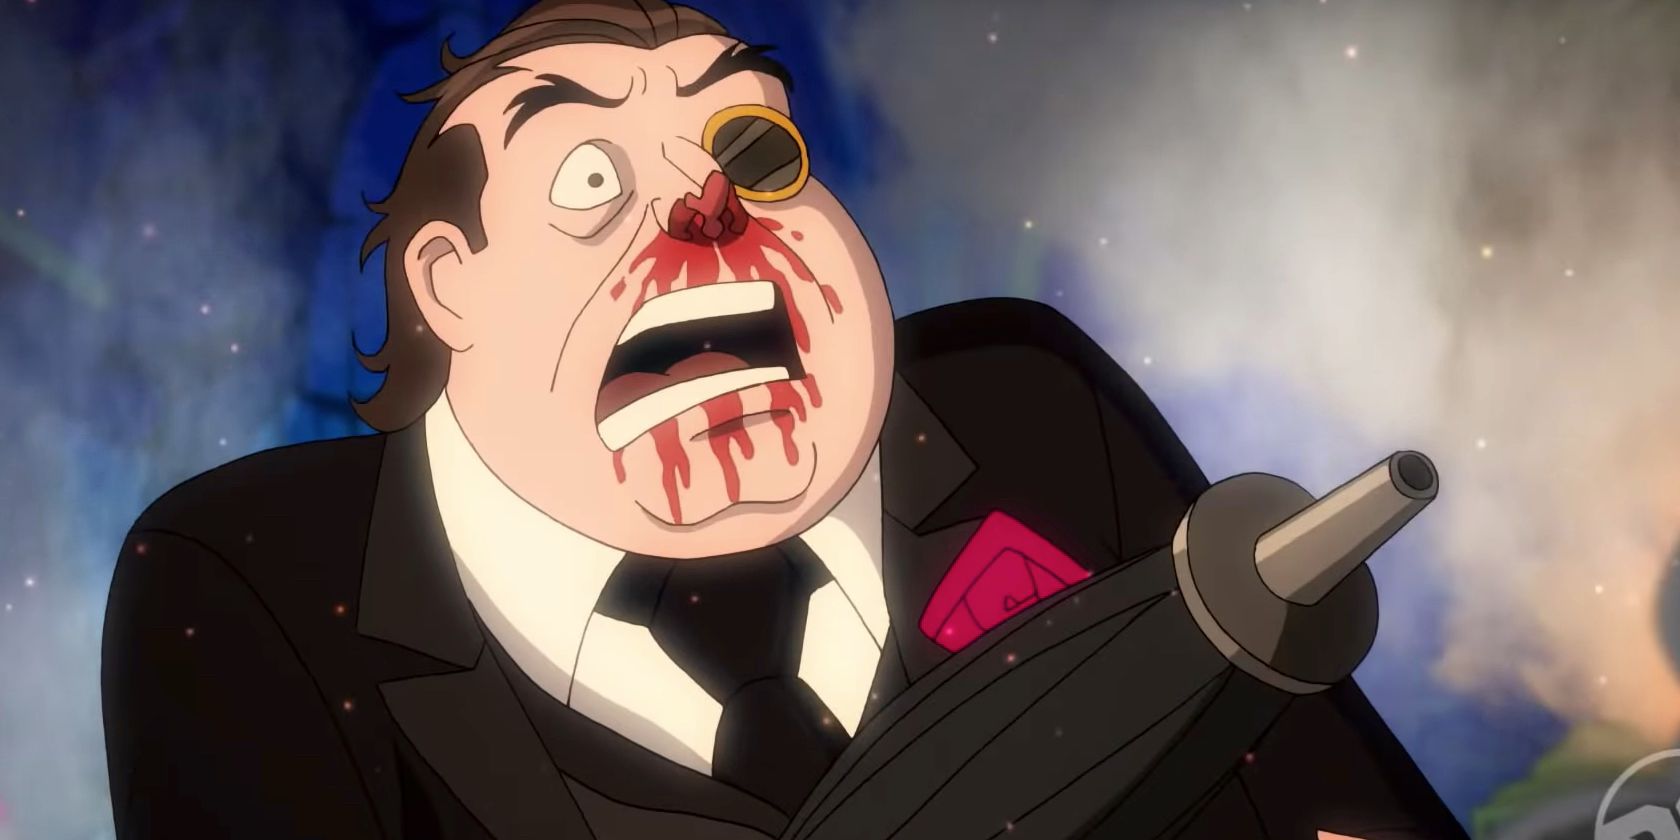 the penguin in Harley Quinn season 2 episode 1 with bitten off nose